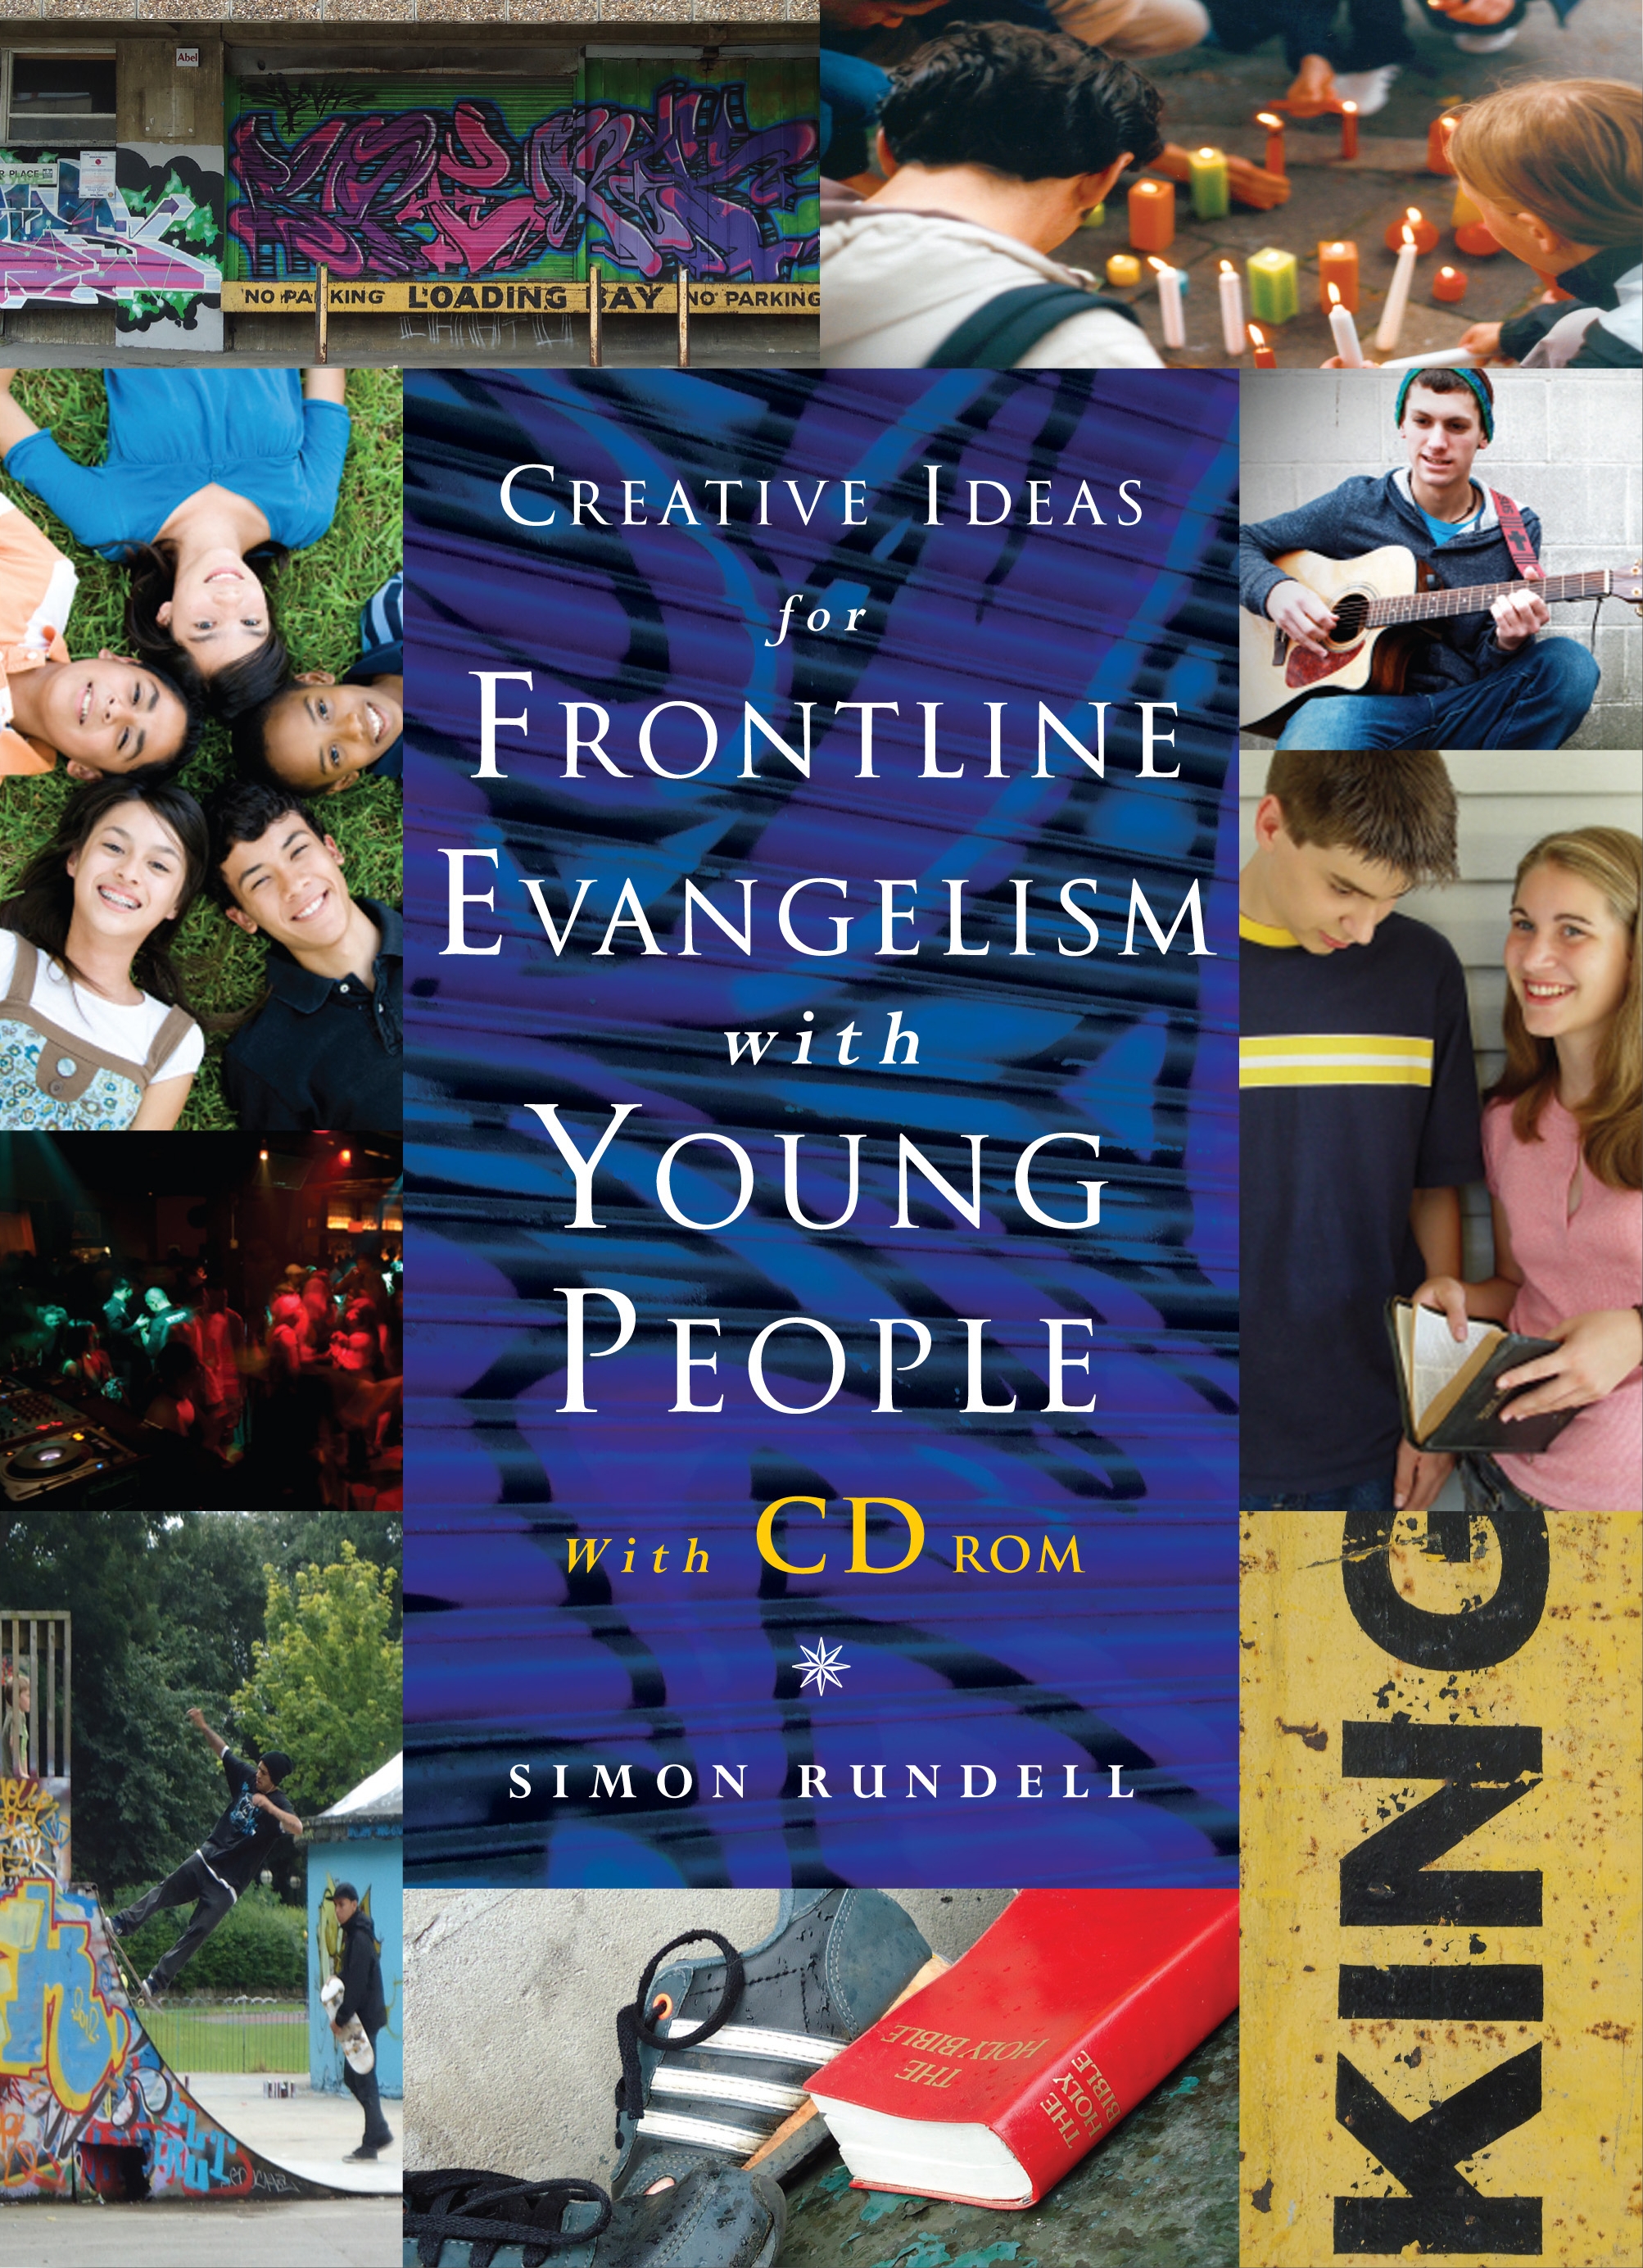 Creative Ideas for Frontline Evangelism with Young People